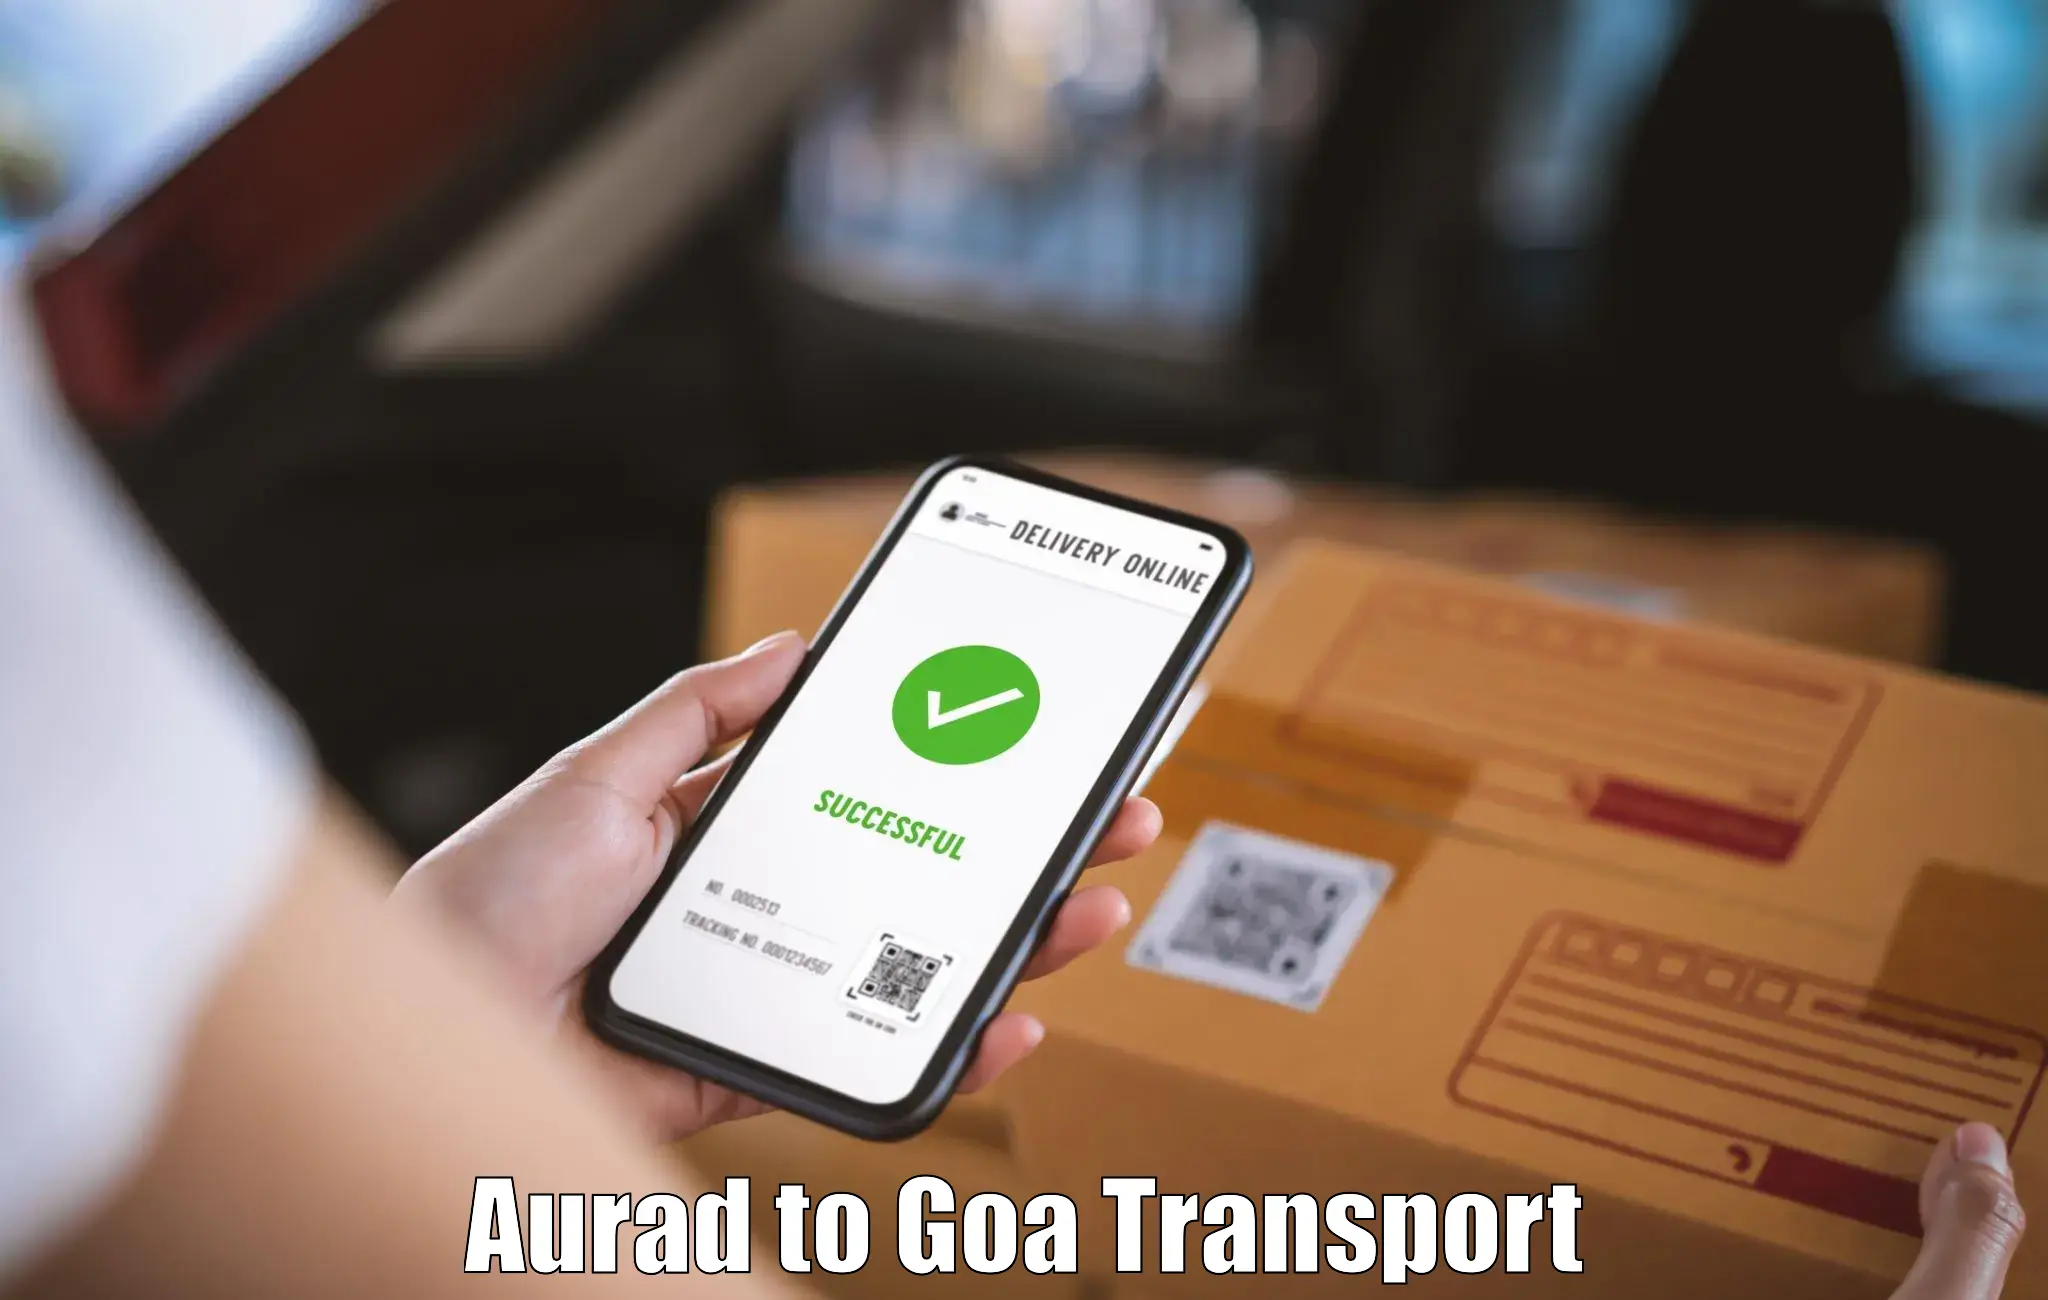 Land transport services Aurad to South Goa